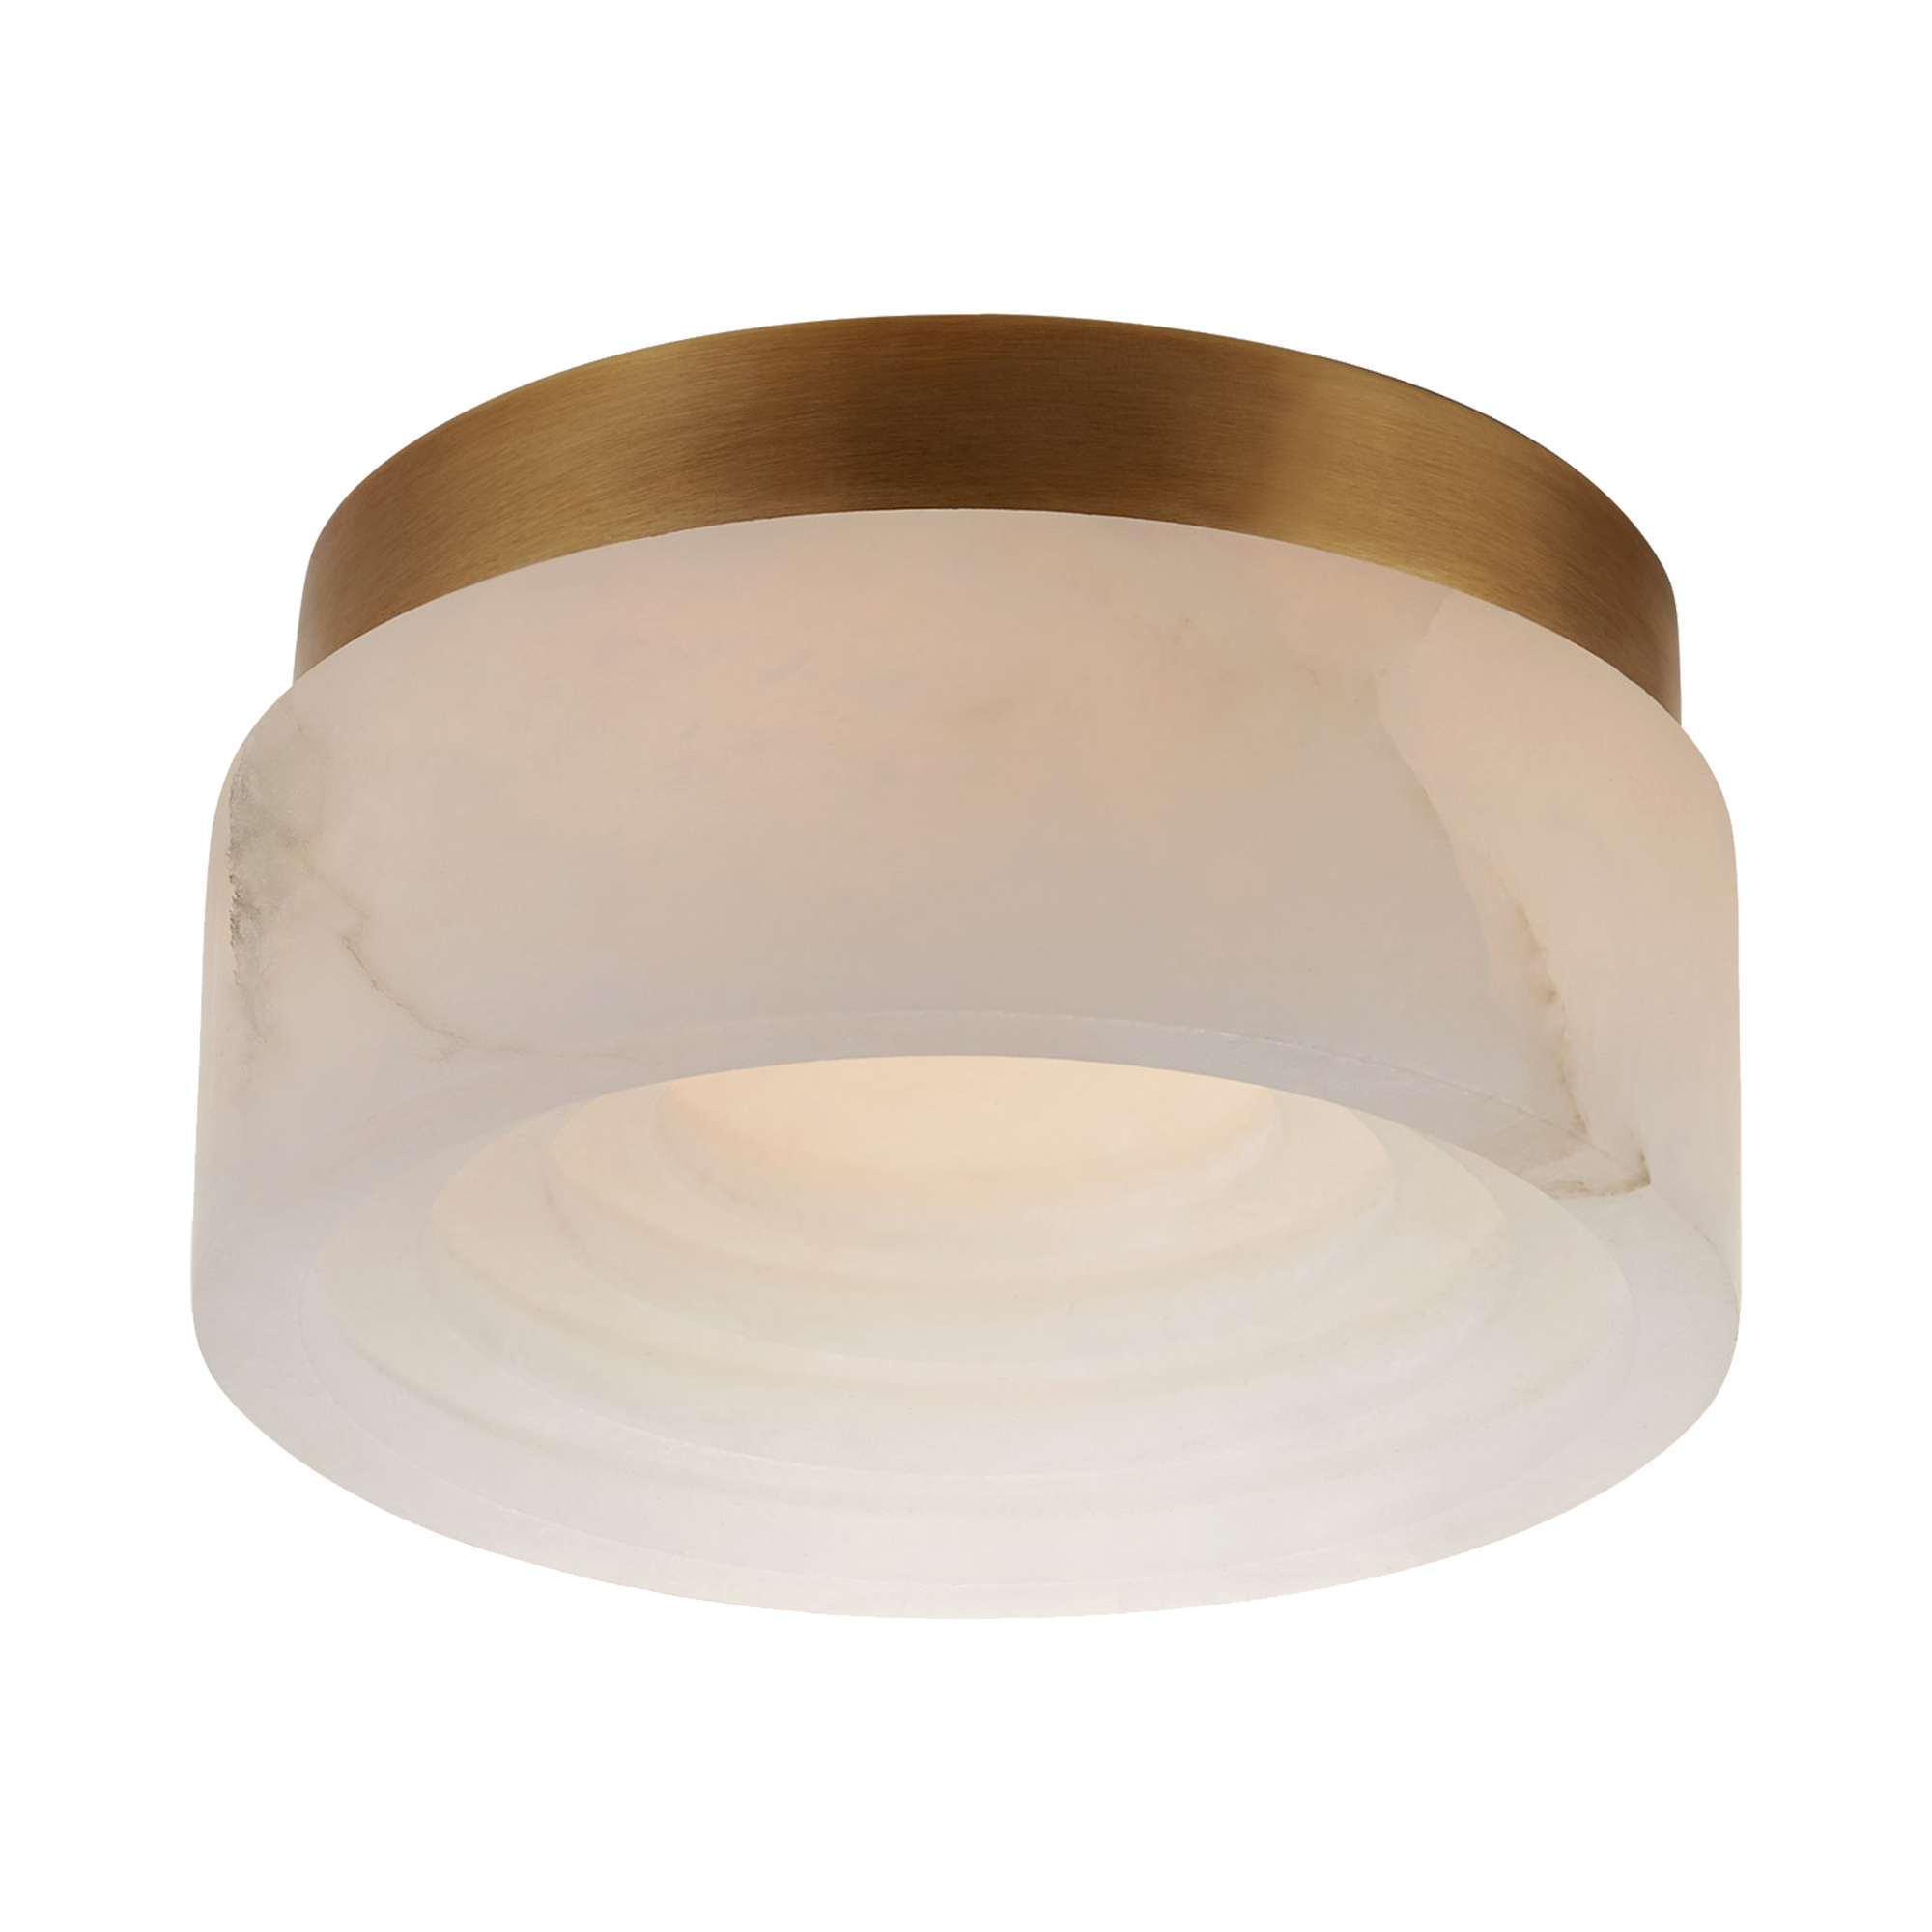 The Otto Solitaire Wall Light features a distinctive design and soulful vibe.